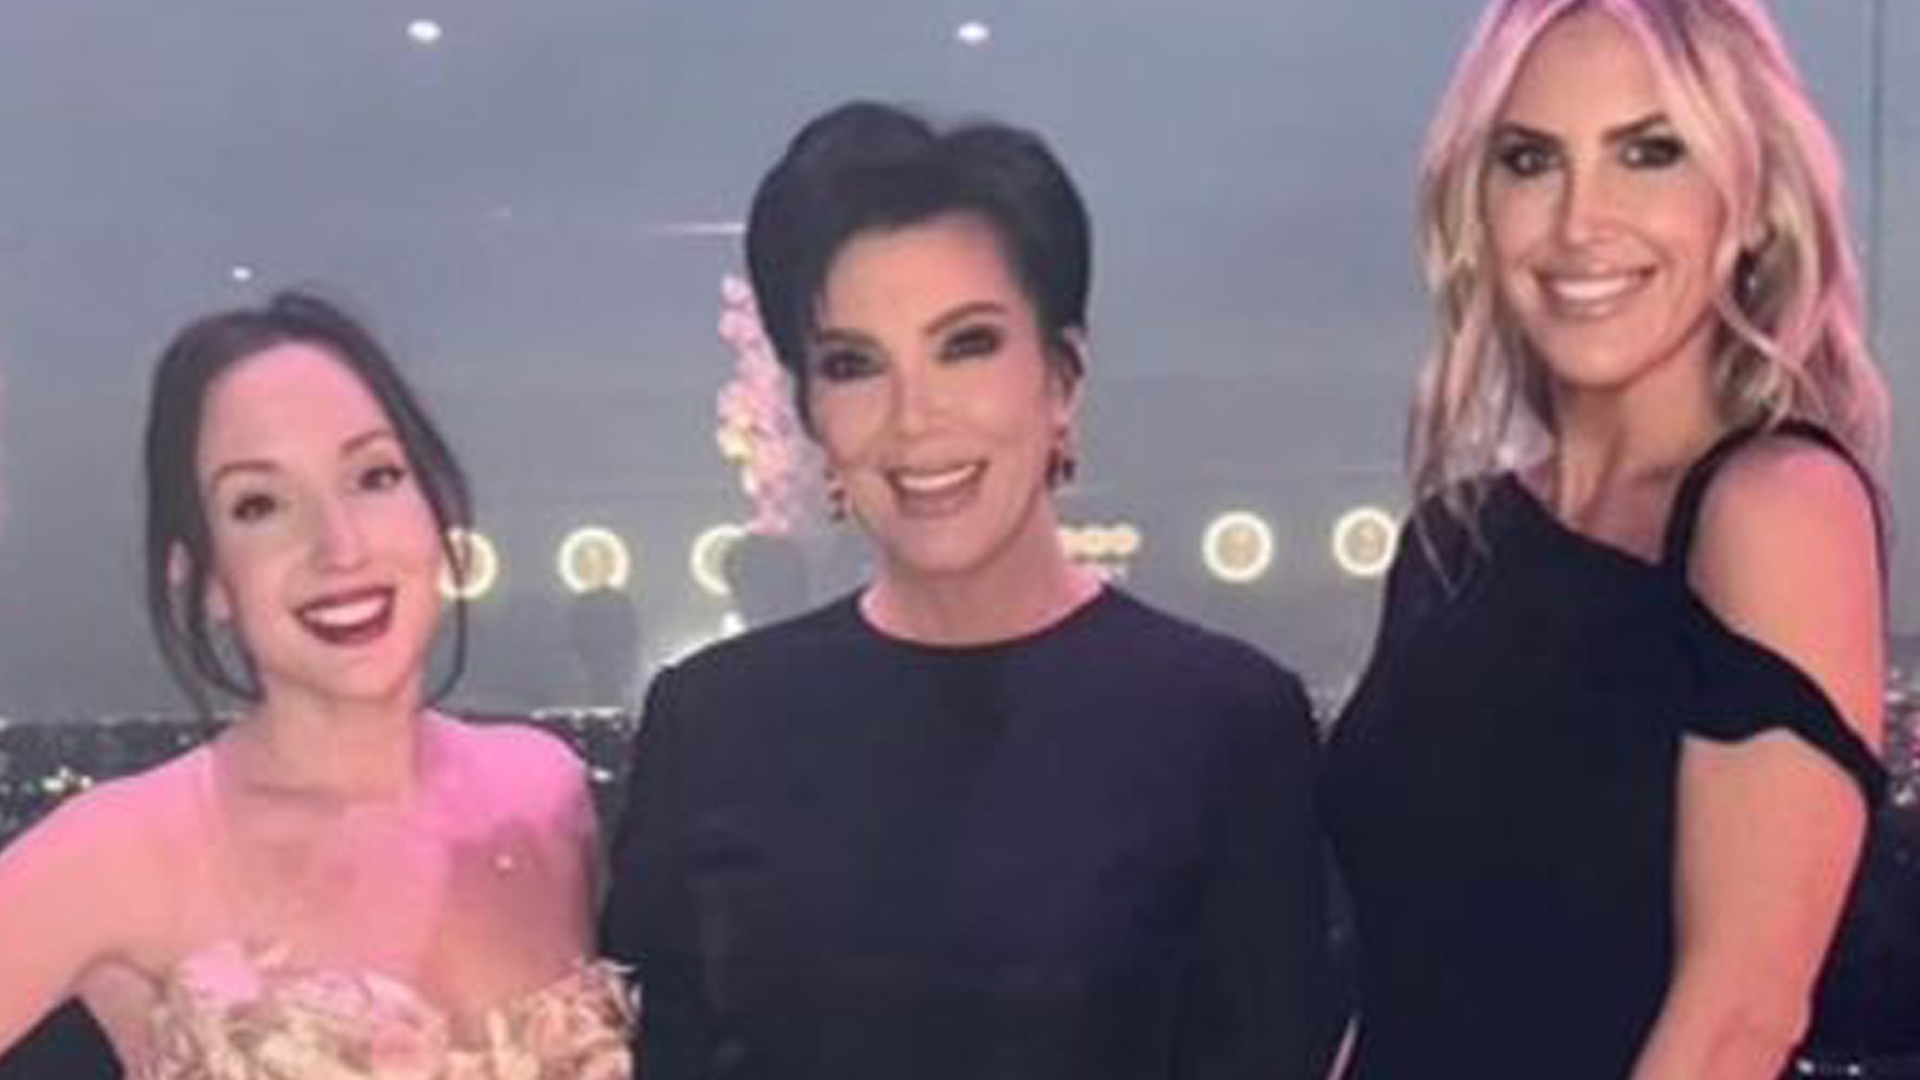 “Kris Jenner Stuns with Slimmer Figure in New Pic – Addressing Concerns over ‘Scary’ Weight Loss” #KrisJenner #WeightLoss #SlimFigure